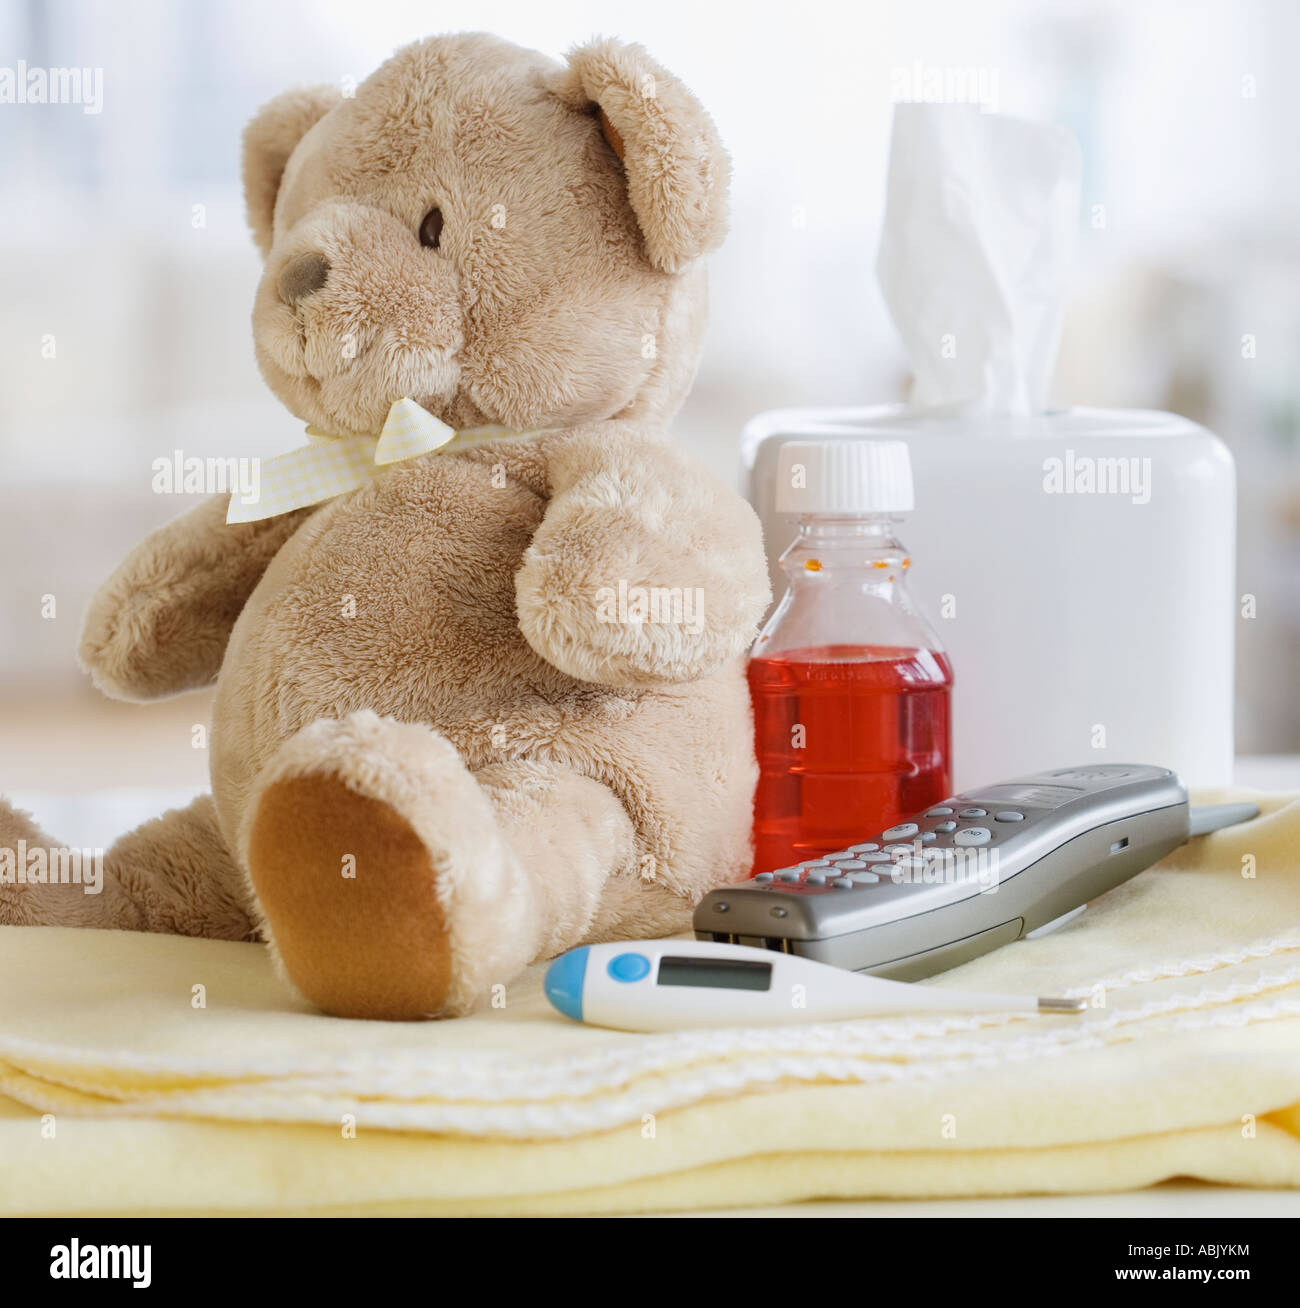 Teddy bear medication thermometer and telephone on blanket Stock Photo -  Alamy